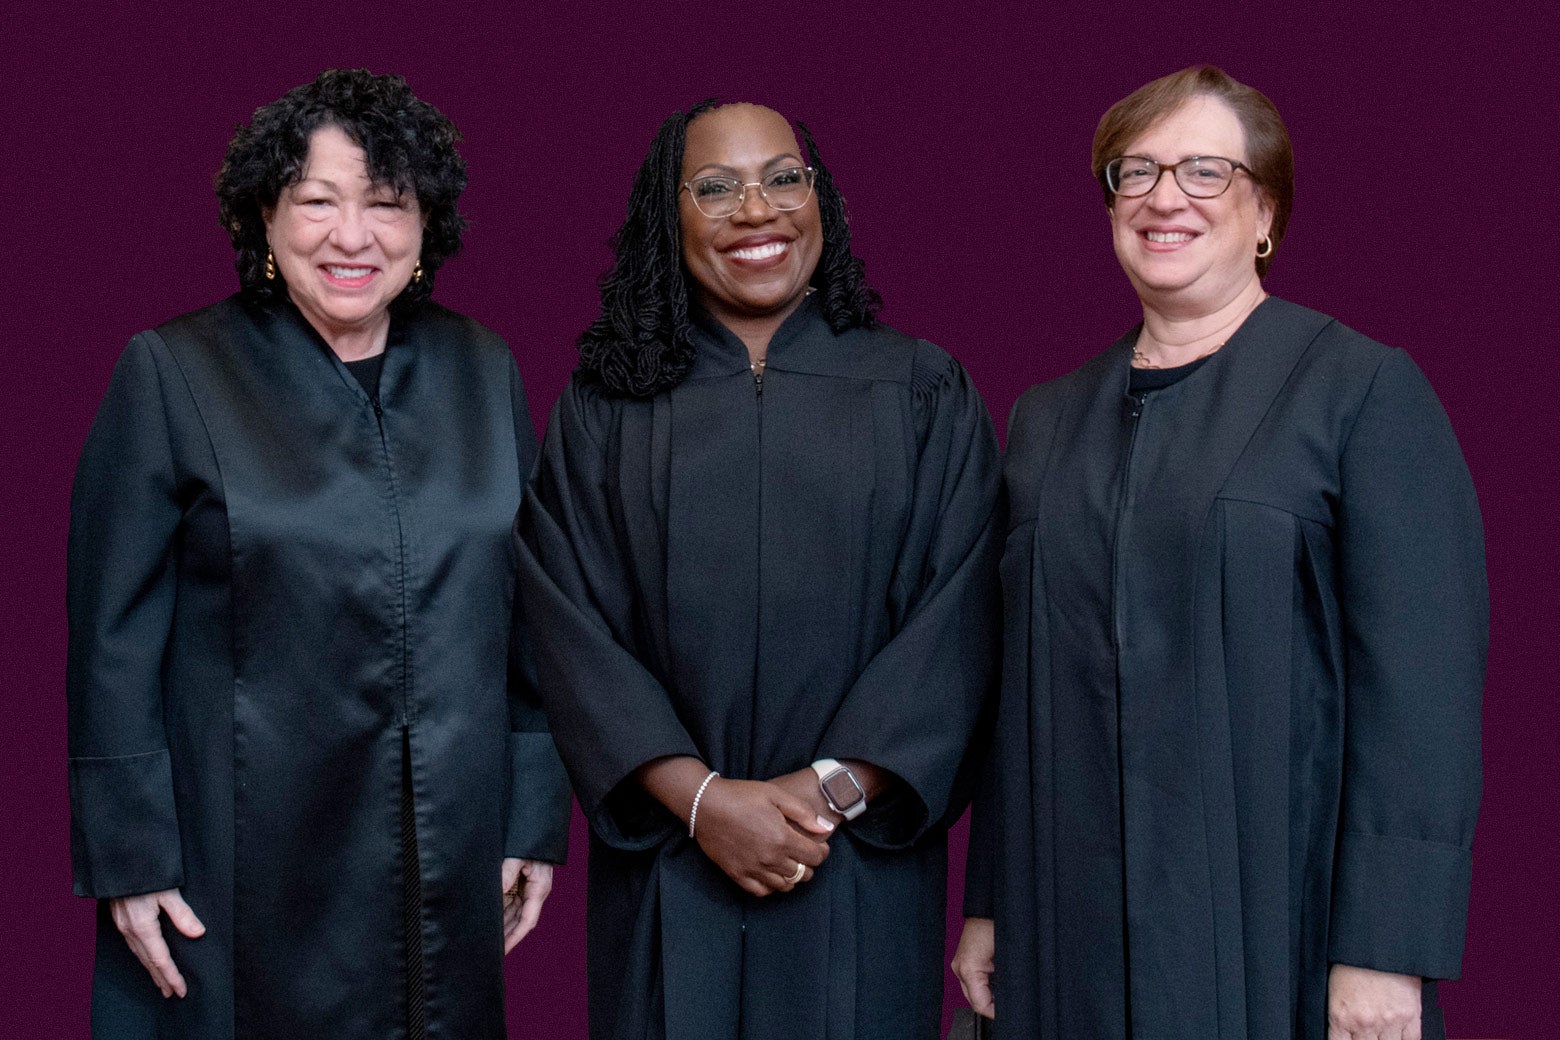 Justices Kagan, Jackson, and Sotomayor, all in robes on a maroon background.